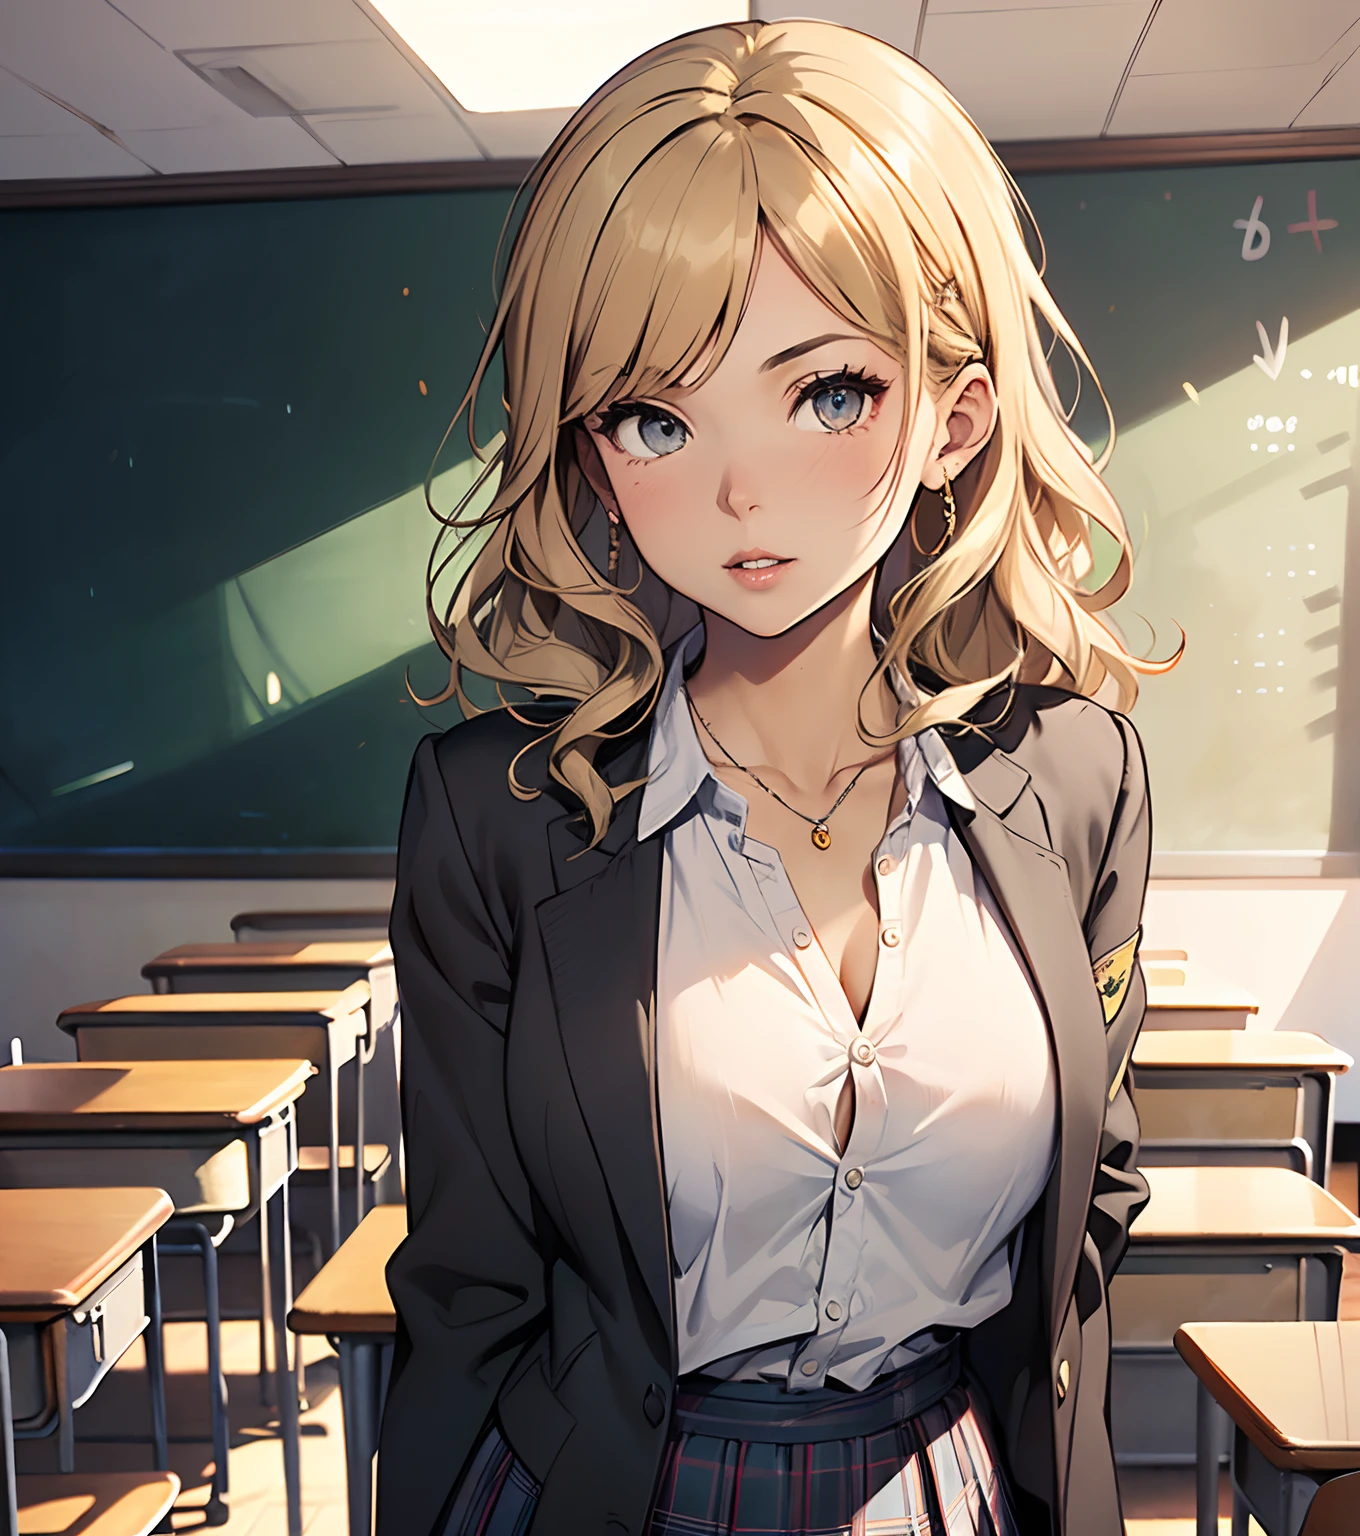 sexy:1.3,
(anatomically correct),(best quality),(masterpiece),skin texture,
light tanned skin,solo,woman,(wavy hair,blonde),(medium breasts),
(school uniform:1.5),(black-Blazer),(school uniform plaid skirt),(School Uniform Shirts),
open clothes,
(sots style),